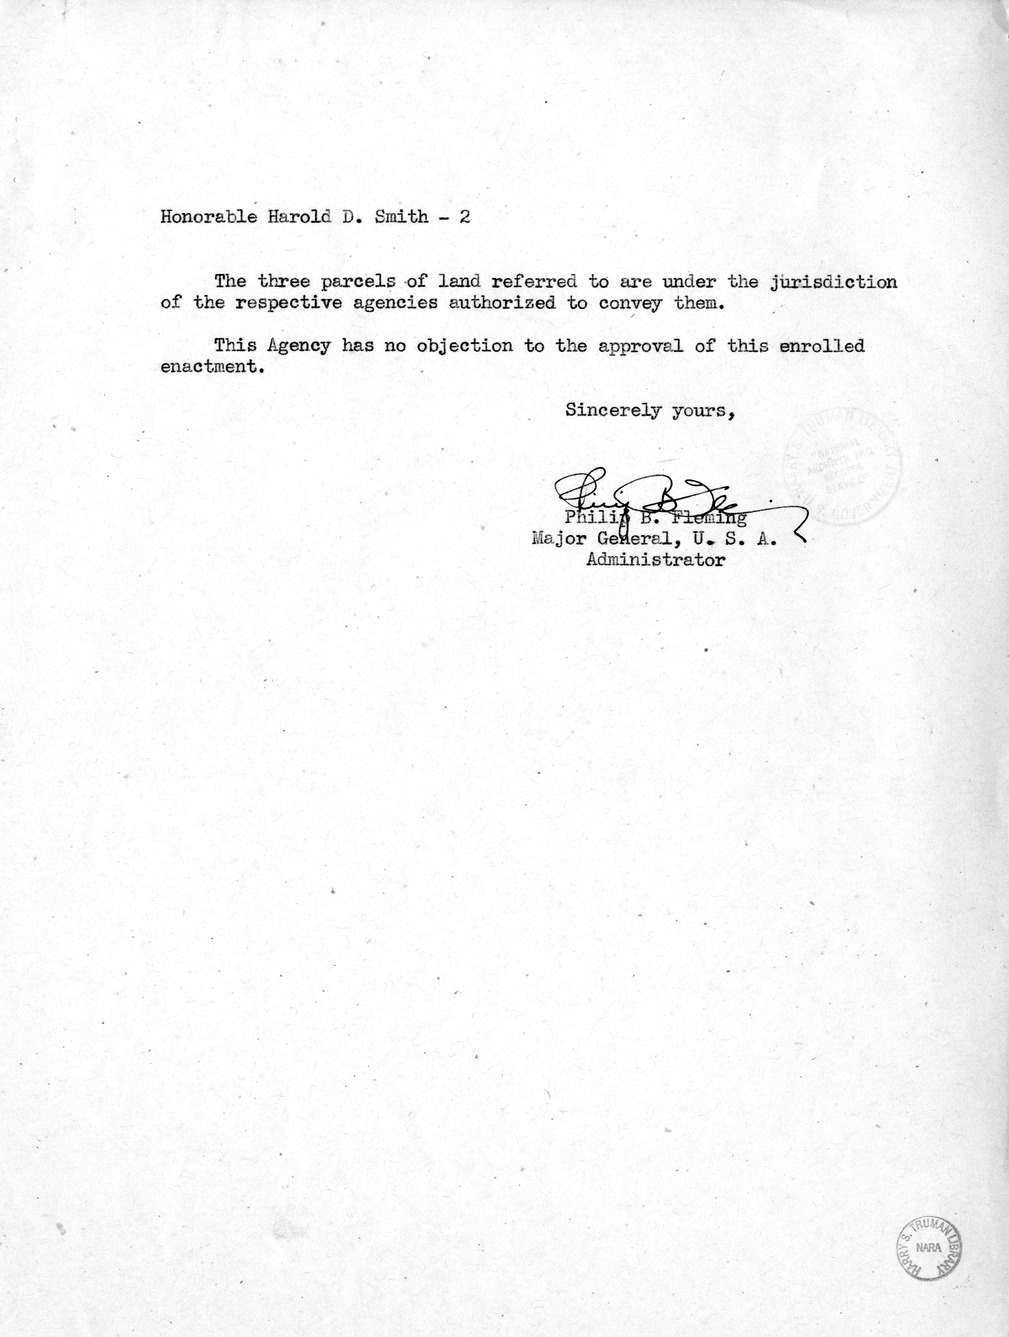 Memorandum from Frederick J. Bailey to M. C. Latta, S. 888, To Authorize the Exchange of Certain Lands in the Vicinity of the War Department Pentagon Building in Arlington, Virginia, with Attachments